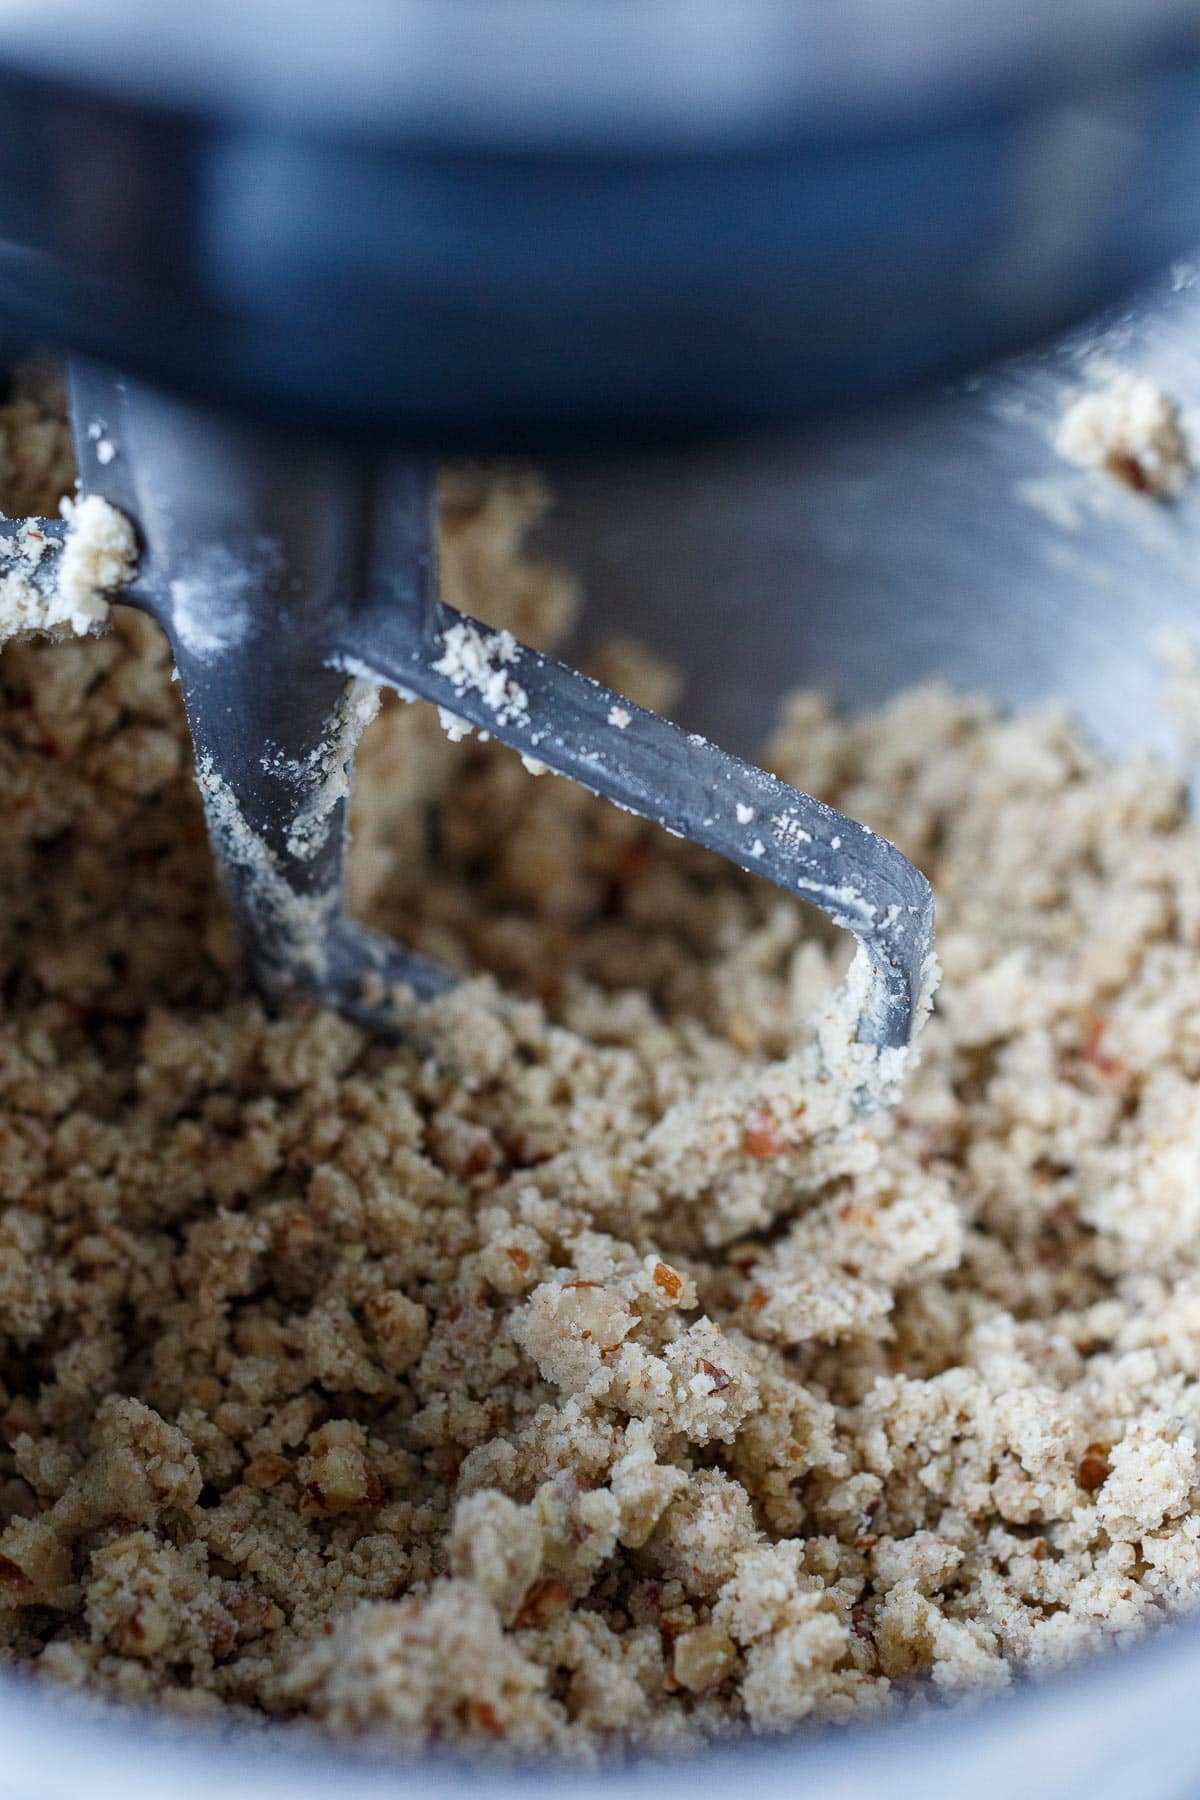 Crumbly cookie dough in the mixer.